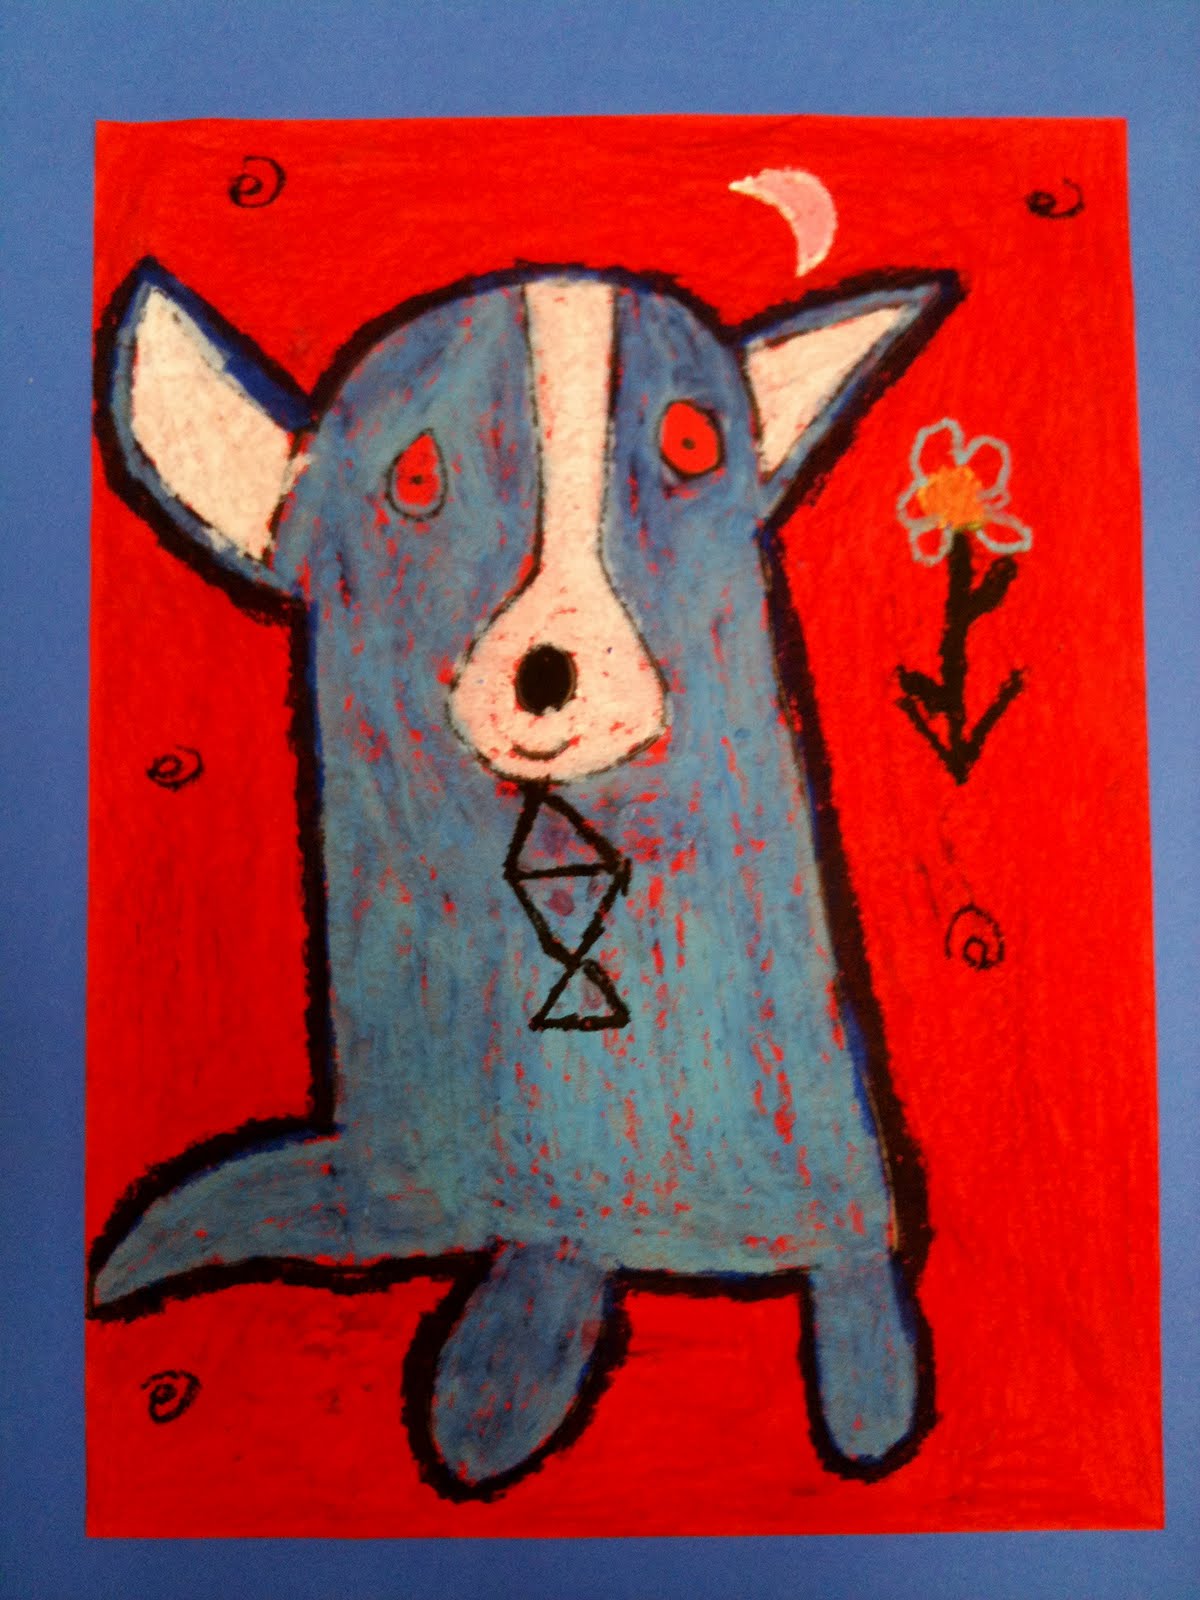 Creating Art: Oil Pastel Dogs Inspired by George Rodrigue's 